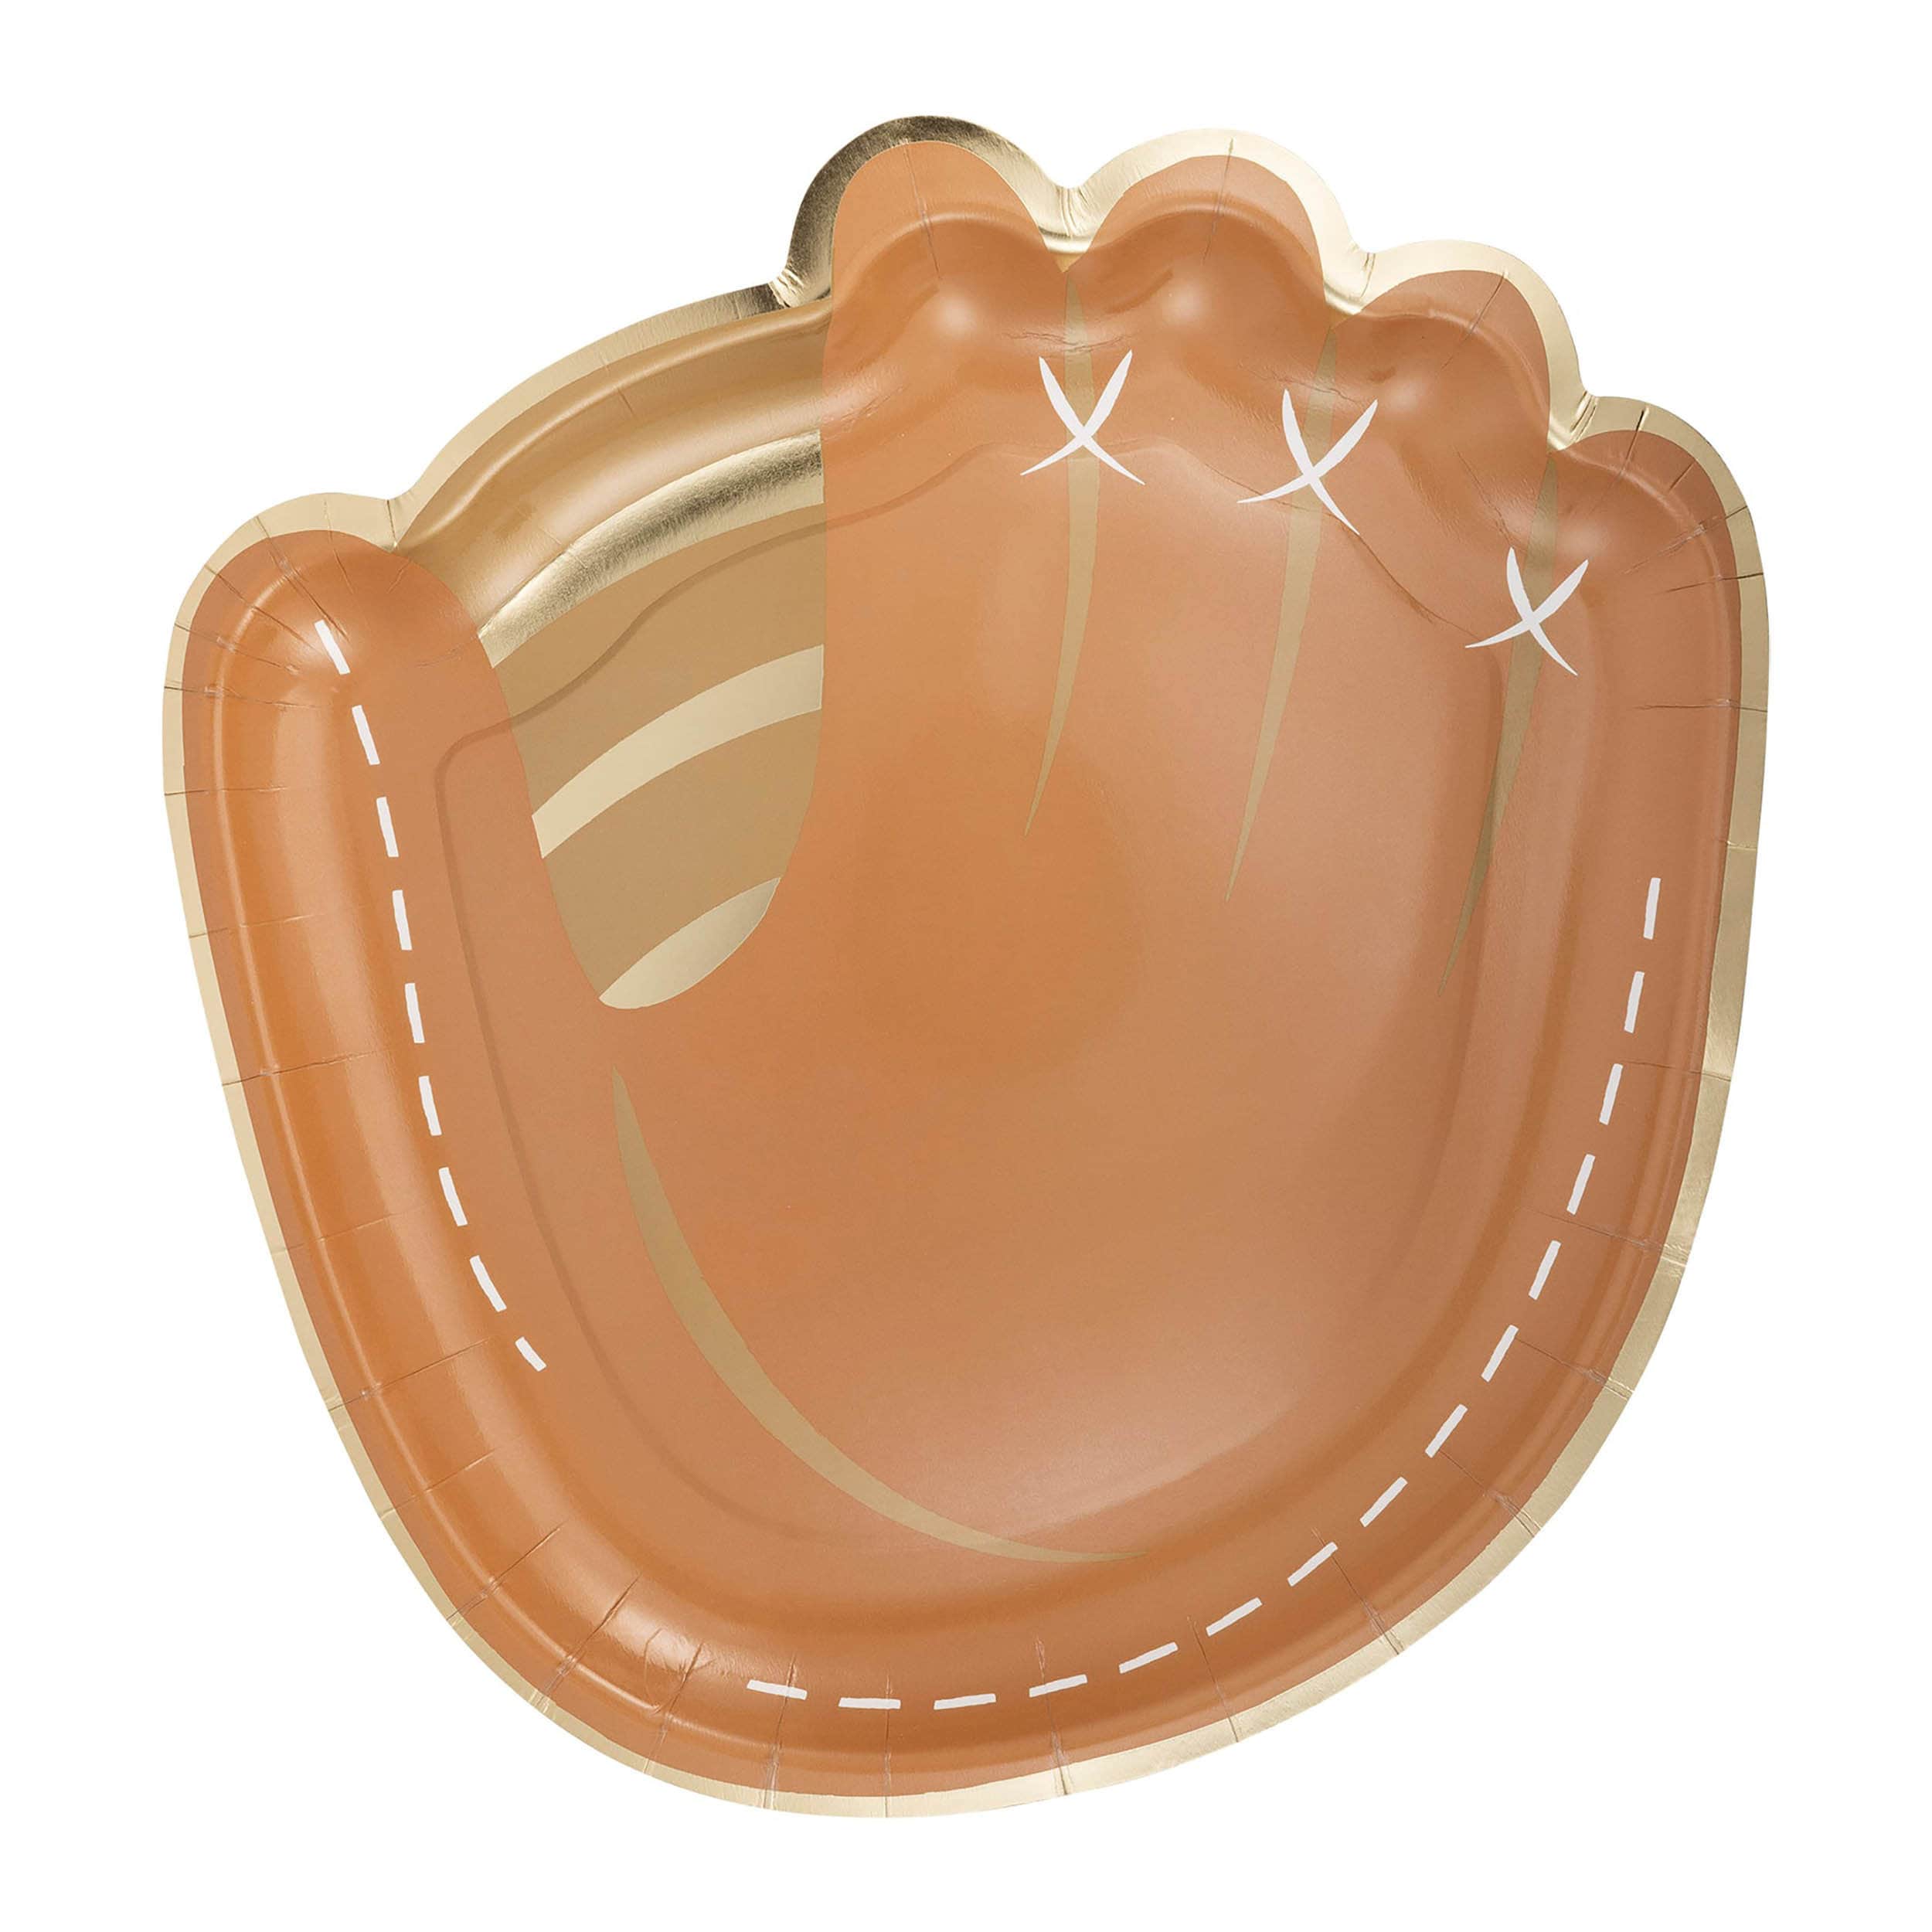 Baseball Glove / Mitt Shaped Party Plate for a Baseball Themed Party - Shaped like a Baseball Glove with Gold Foil Embellishments